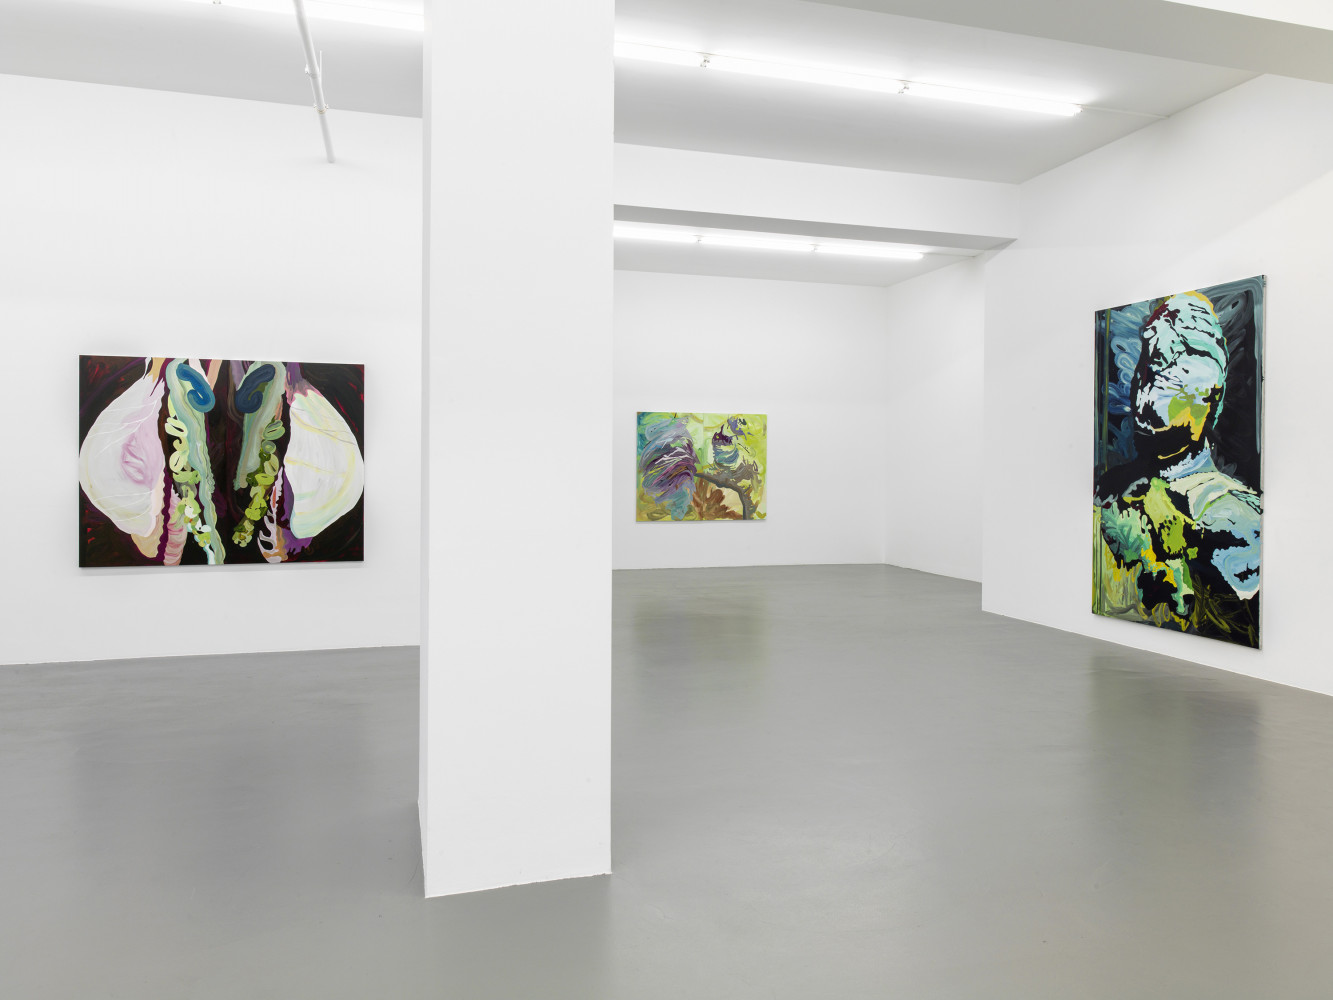 Clare Woods, ‘Hanging, Hollow and Holes’, Installation view, Buchmann Galerie, 2014